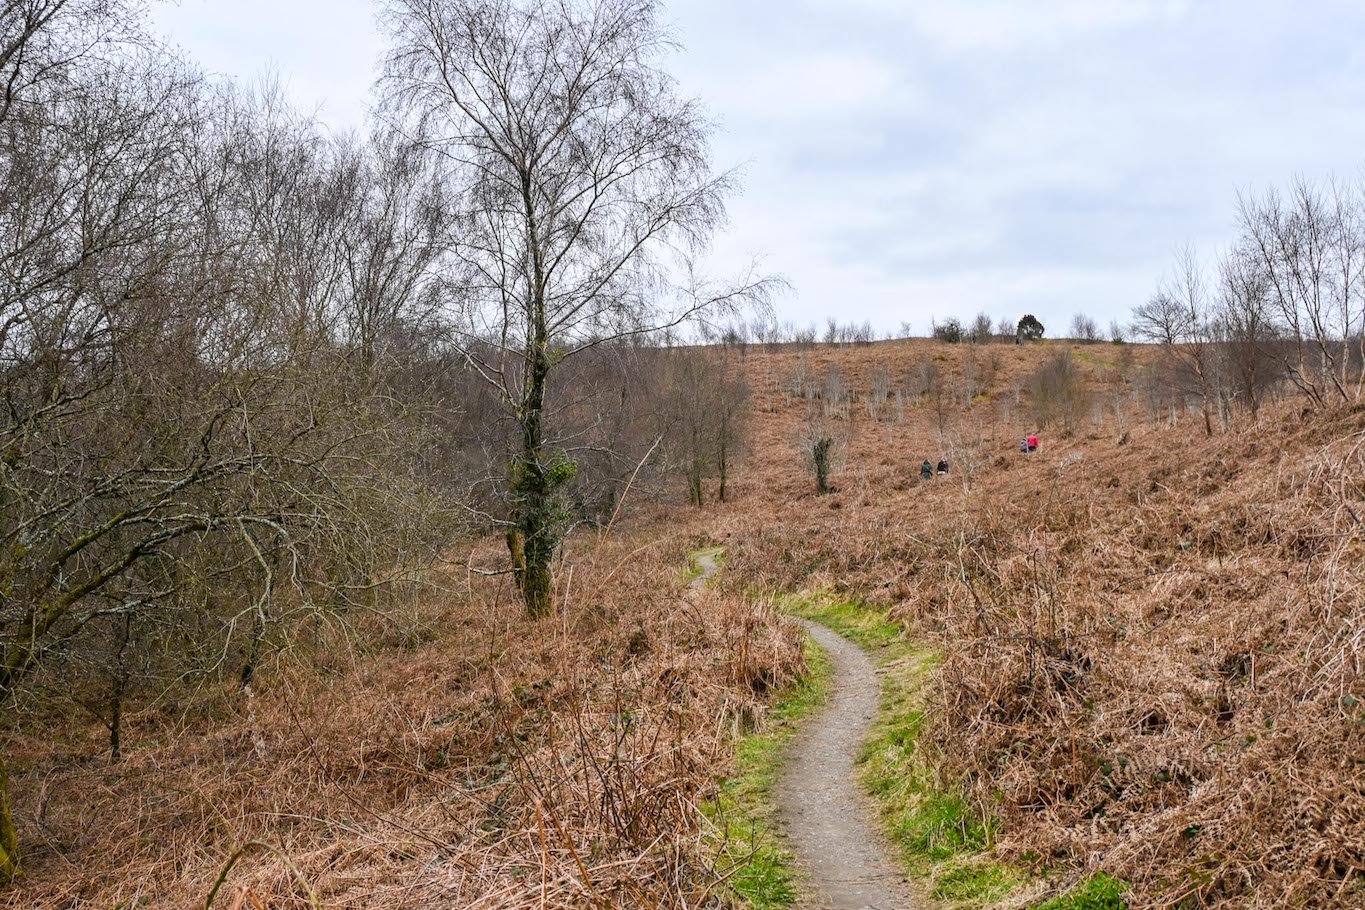 Caerphilly Mountain footpath